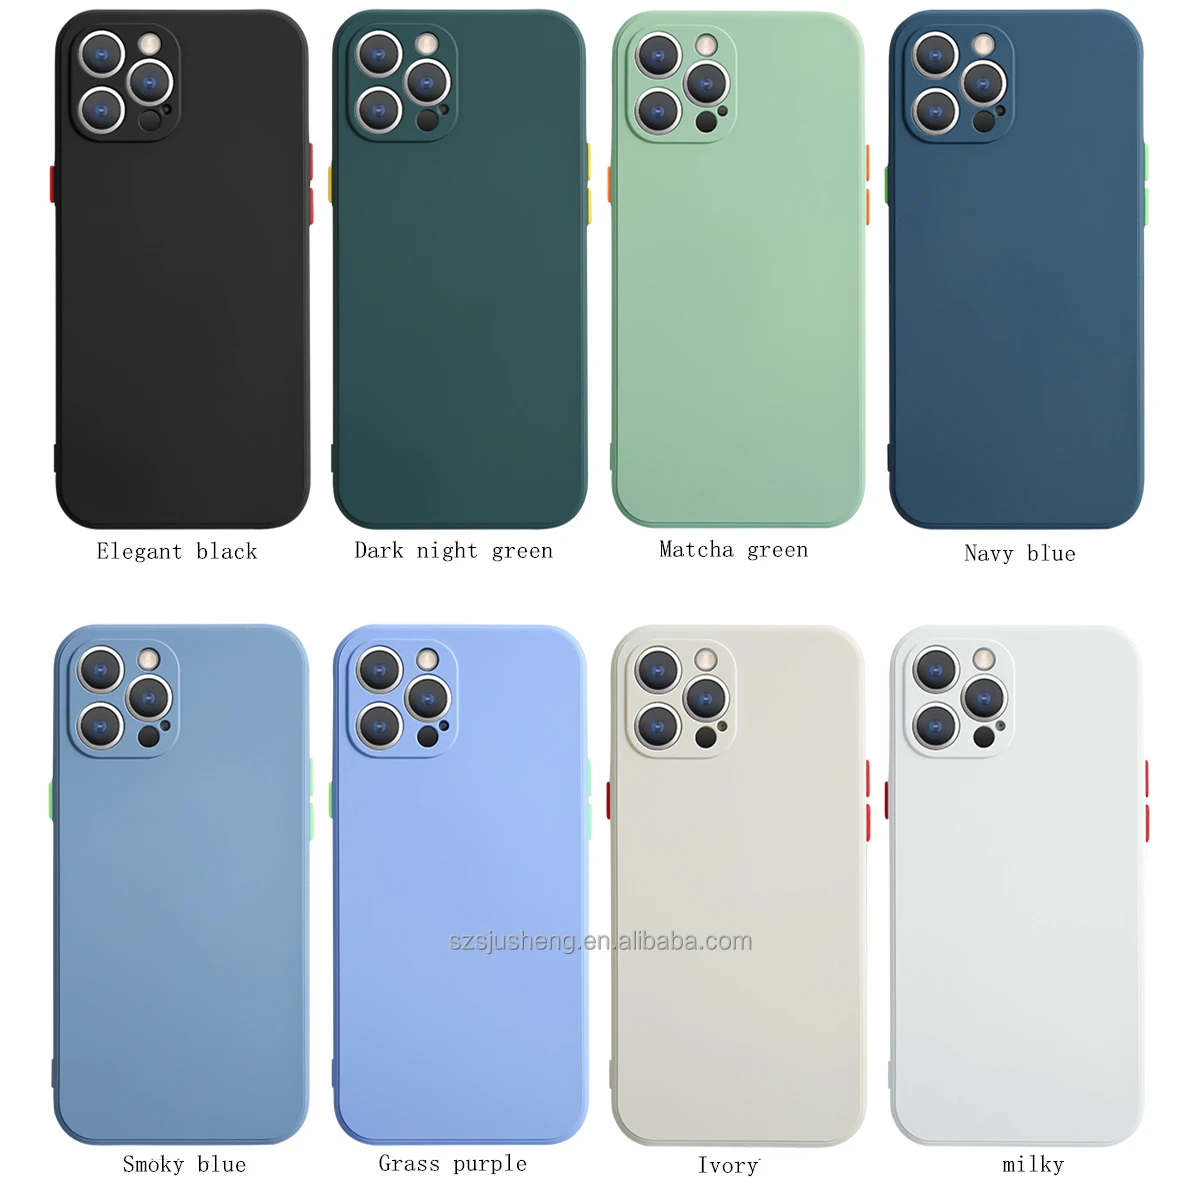 

2021 new color contrast liquid silicone mobile phone soft case for iPhone 11 Promax phone all-inclusive protection 8plus xr, 12 colors